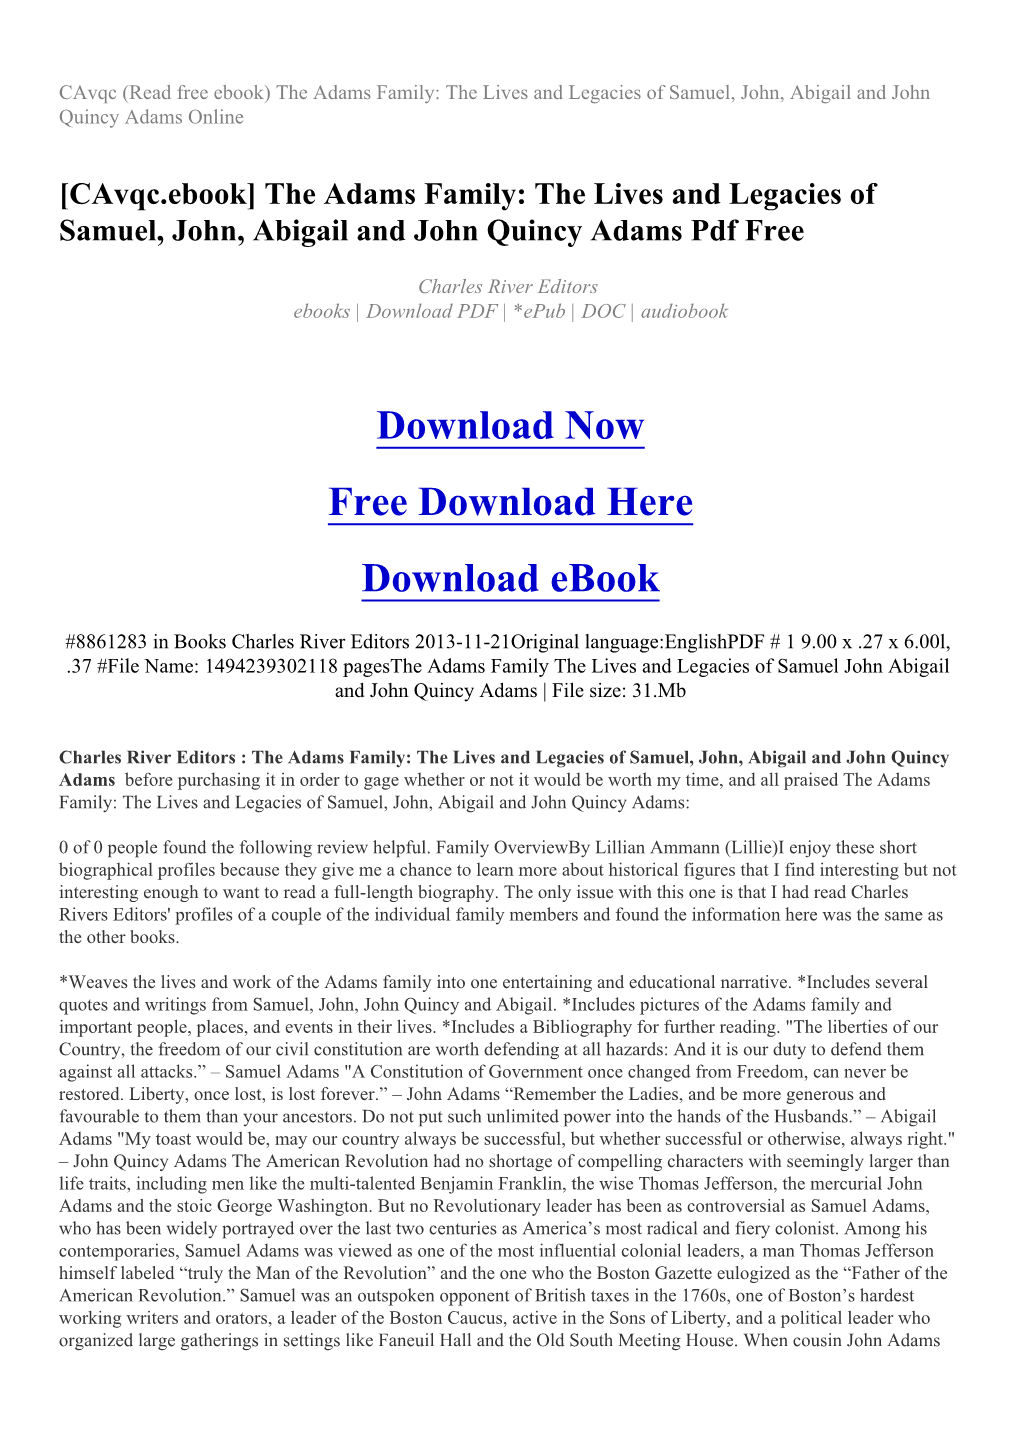 The Adams Family: the Lives and Legacies of Samuel, John, Abigail and John Quincy Adams Online